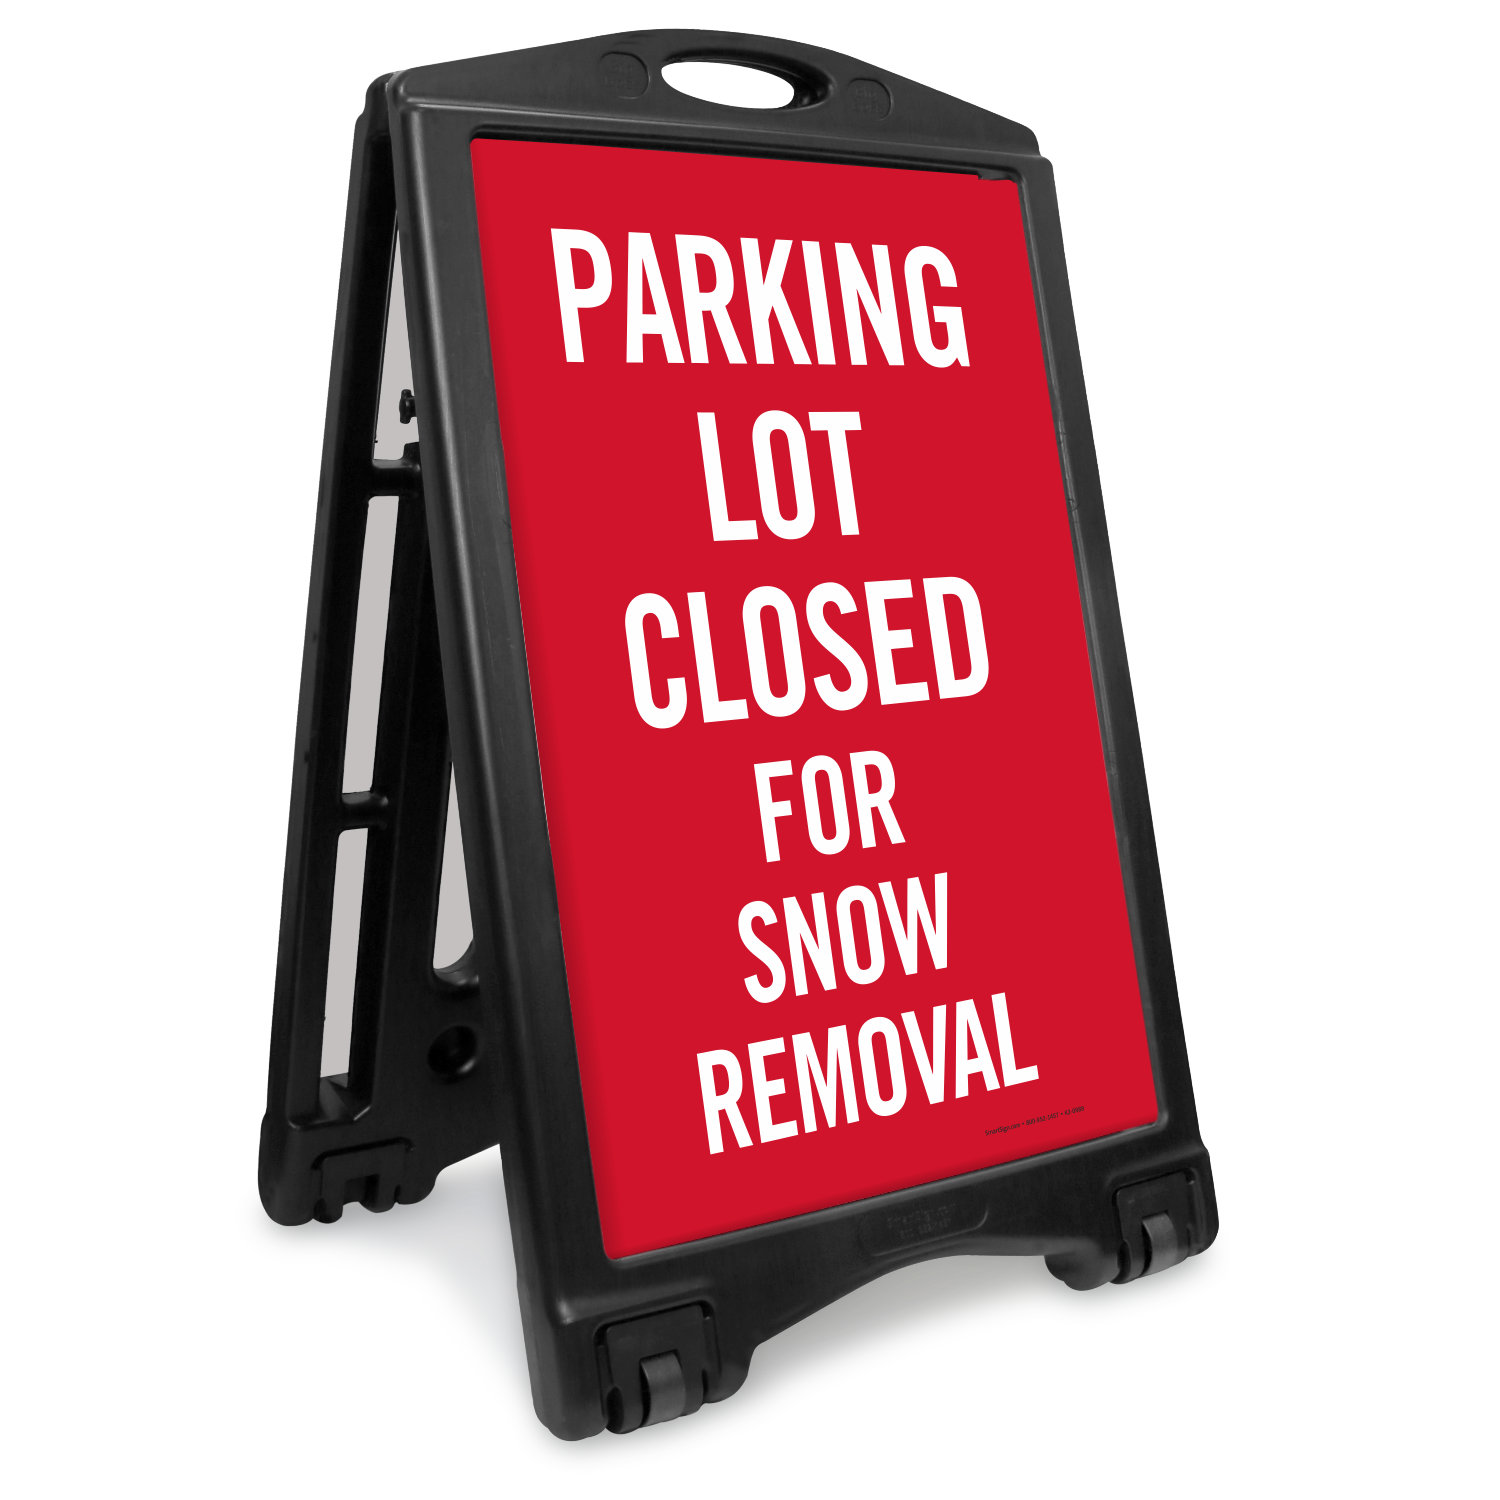 Parking Lot Closed For Snow Removal Portable Sidewalk Sign